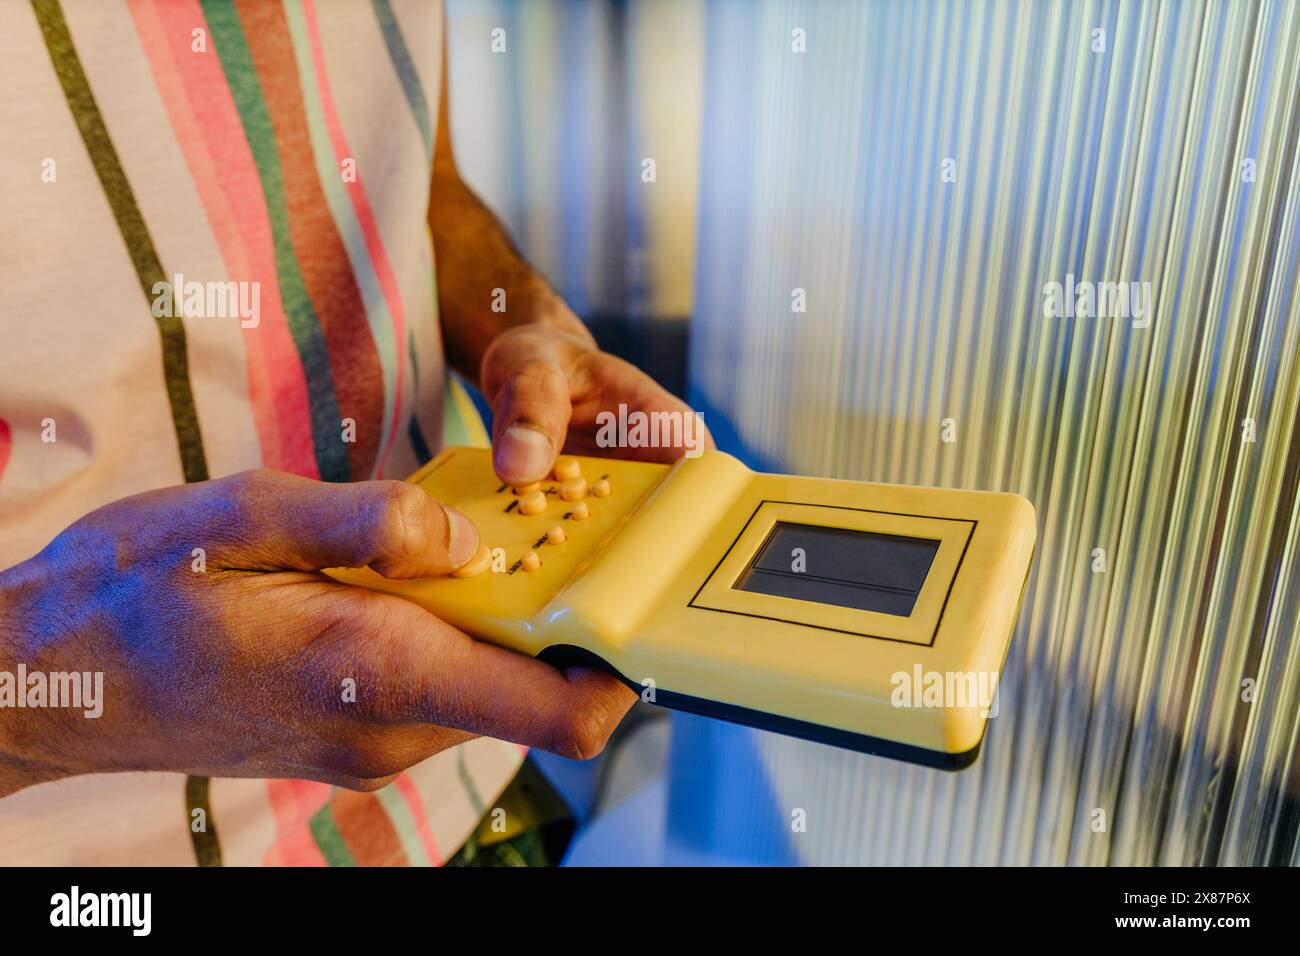 Man playing yellow colored handheld game near striped wall Stock Photo